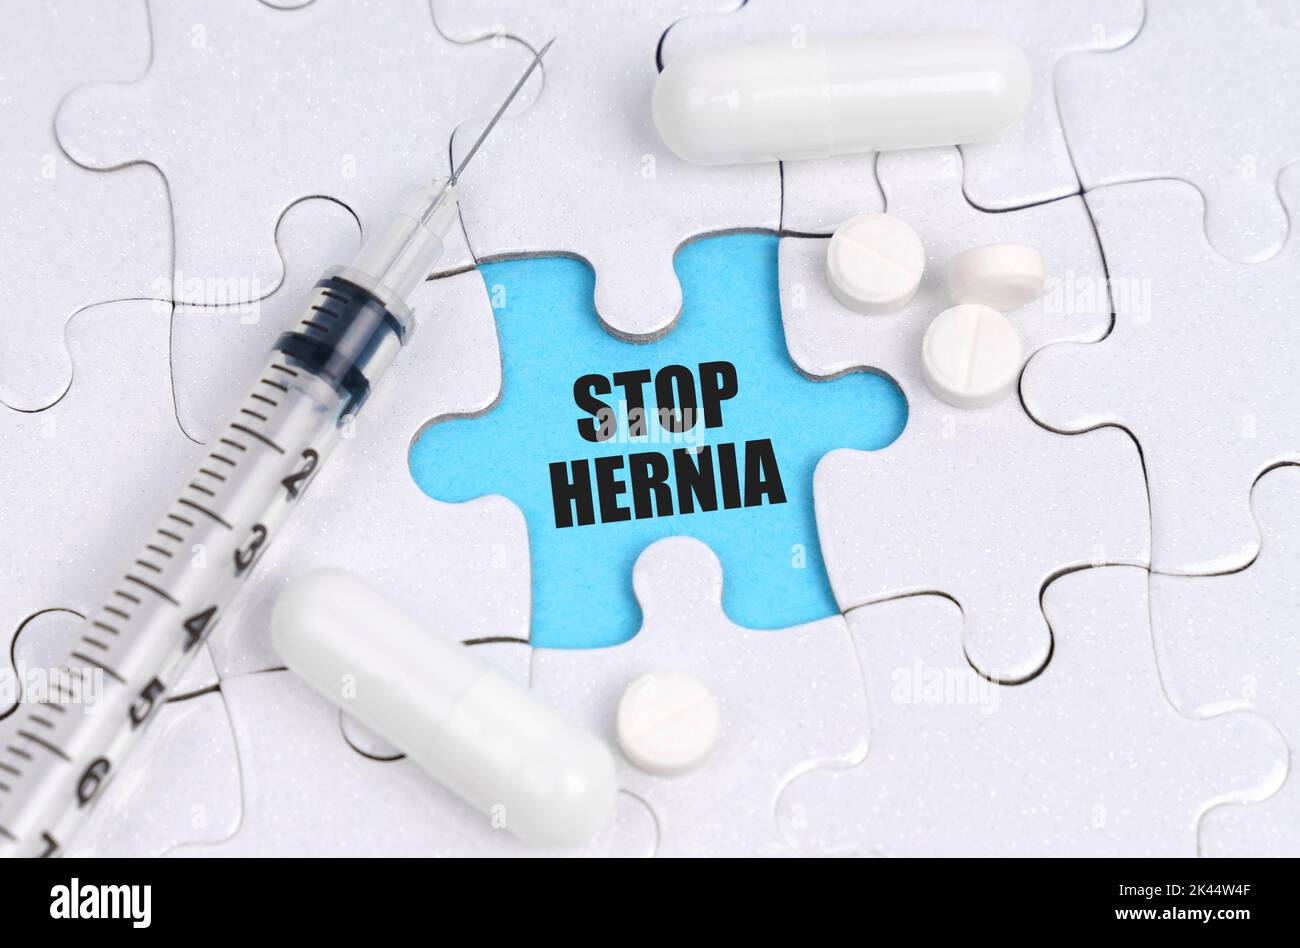 Medicine concept. There are pills and a syringe on the white puzzles. Inside on a blue background the inscription - STOP HERNIA Stock Photo